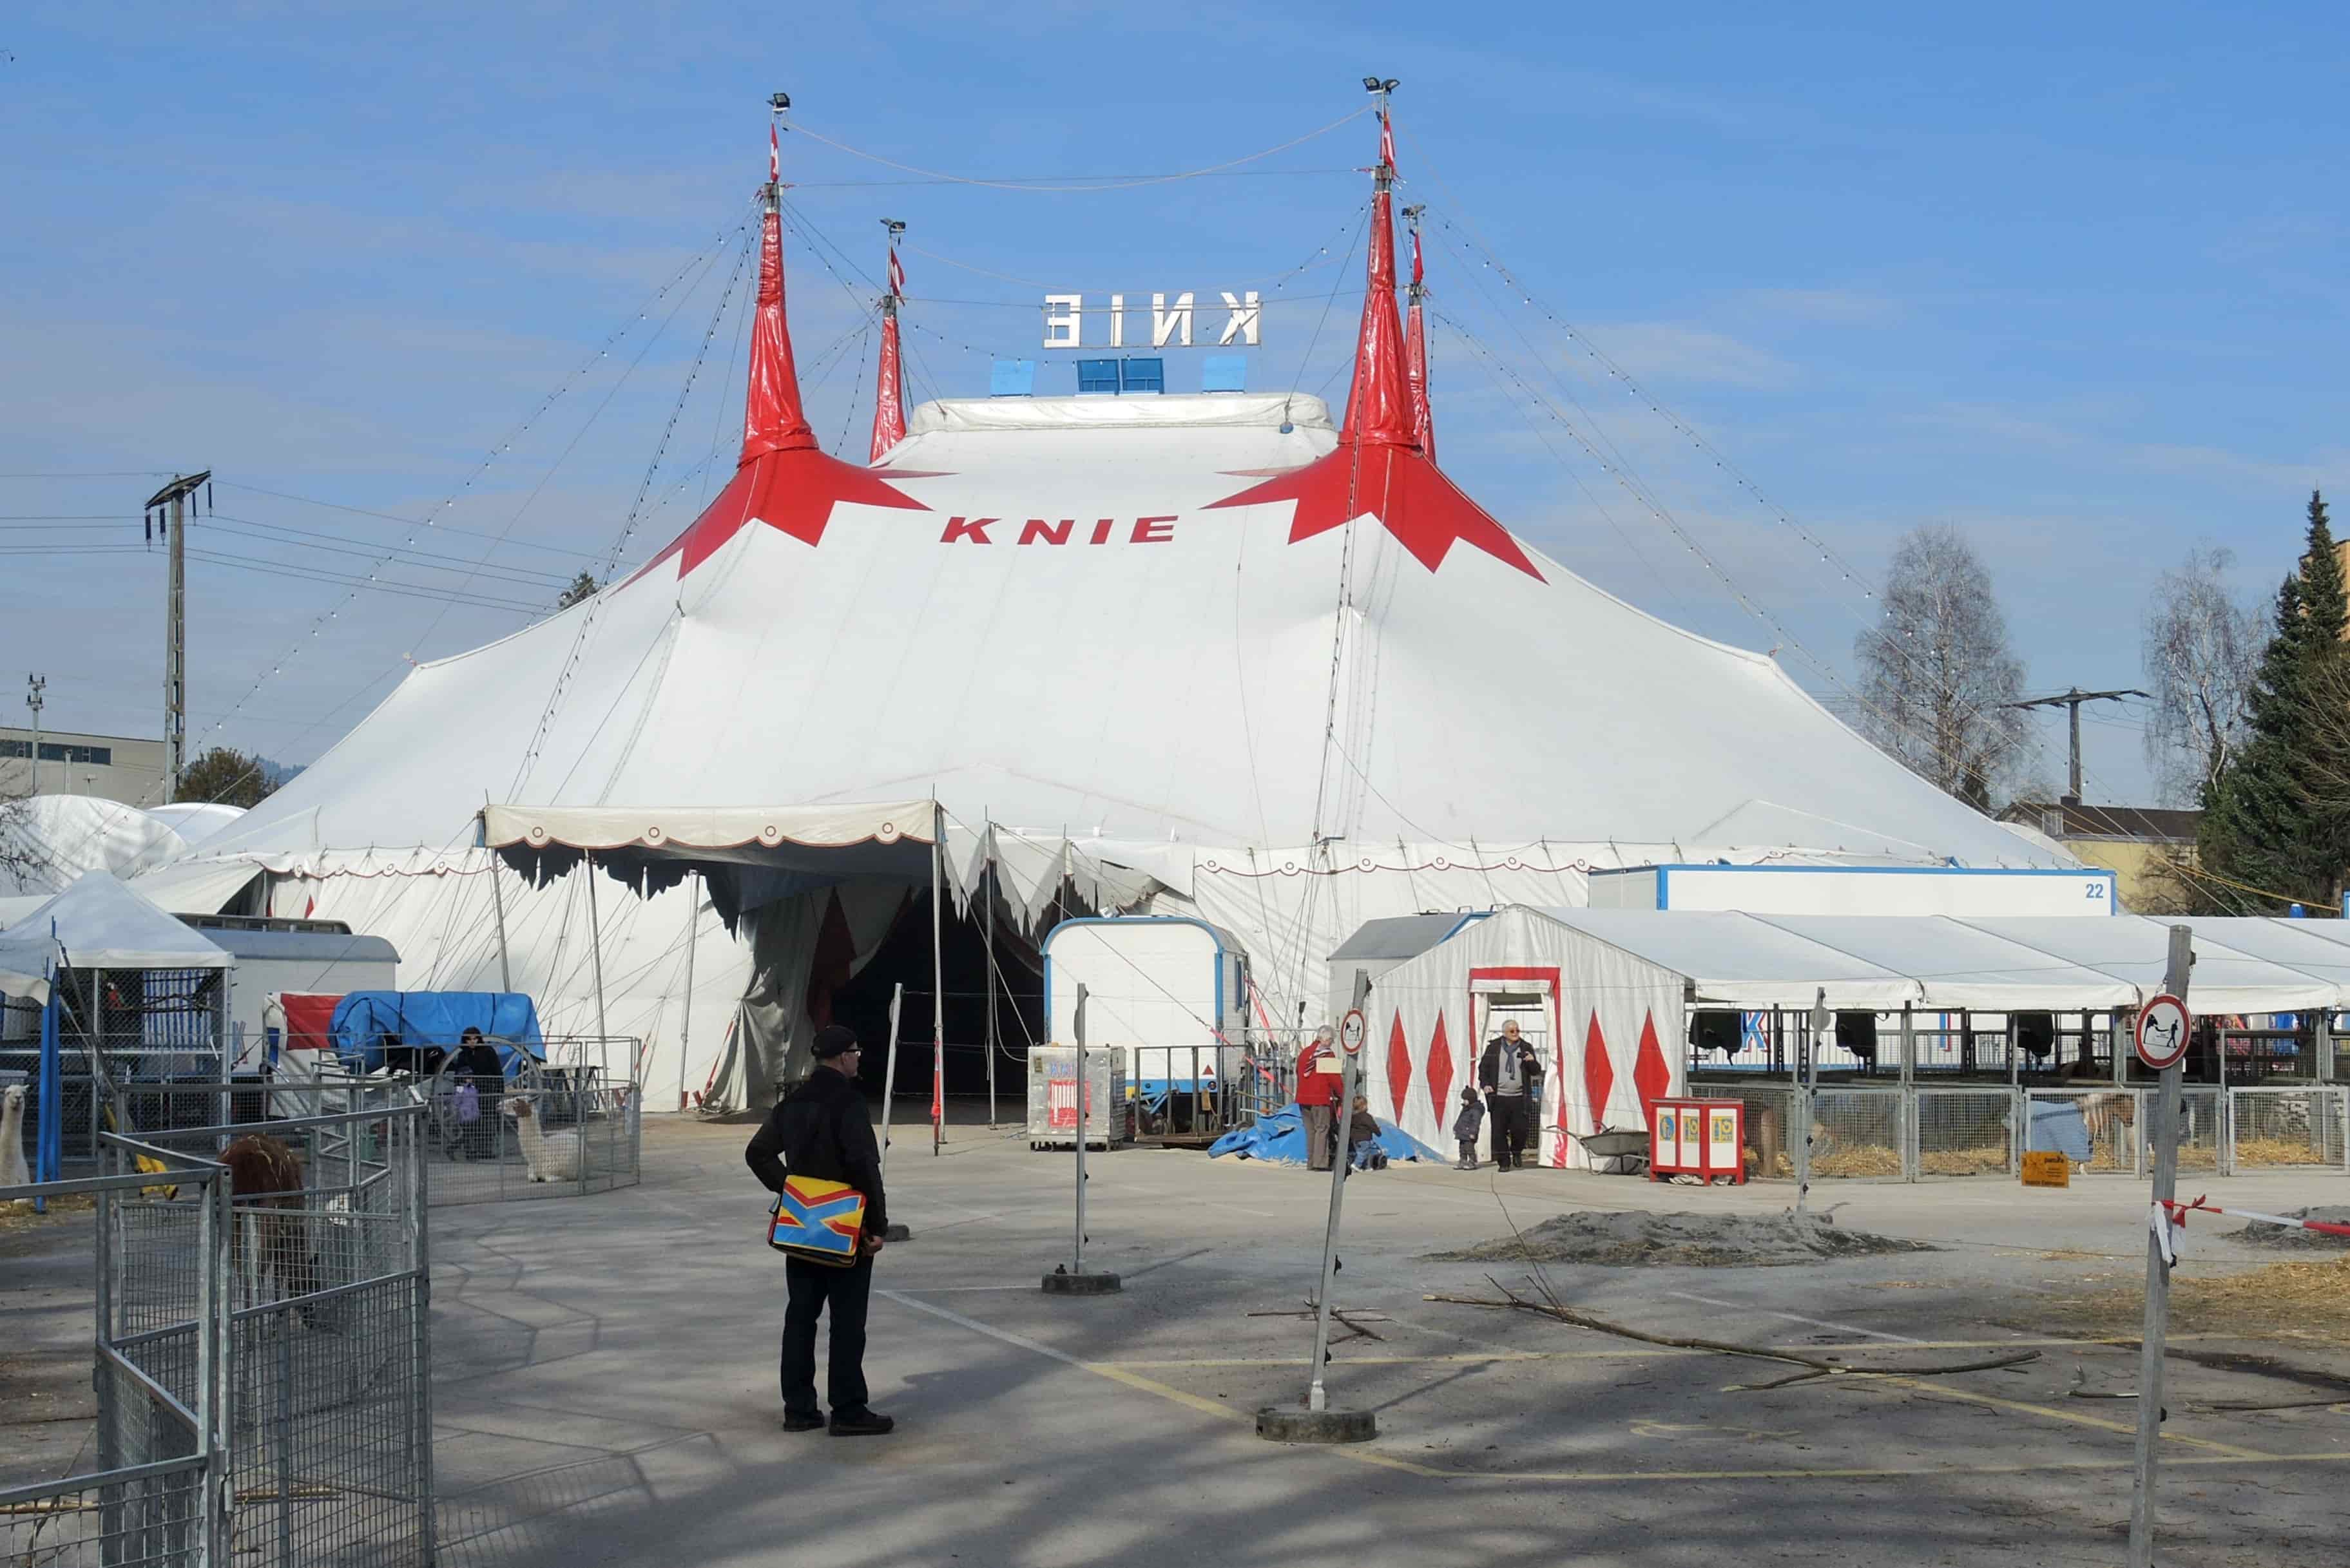 6-facts-you-must-know-about-cirkus-knie-austria